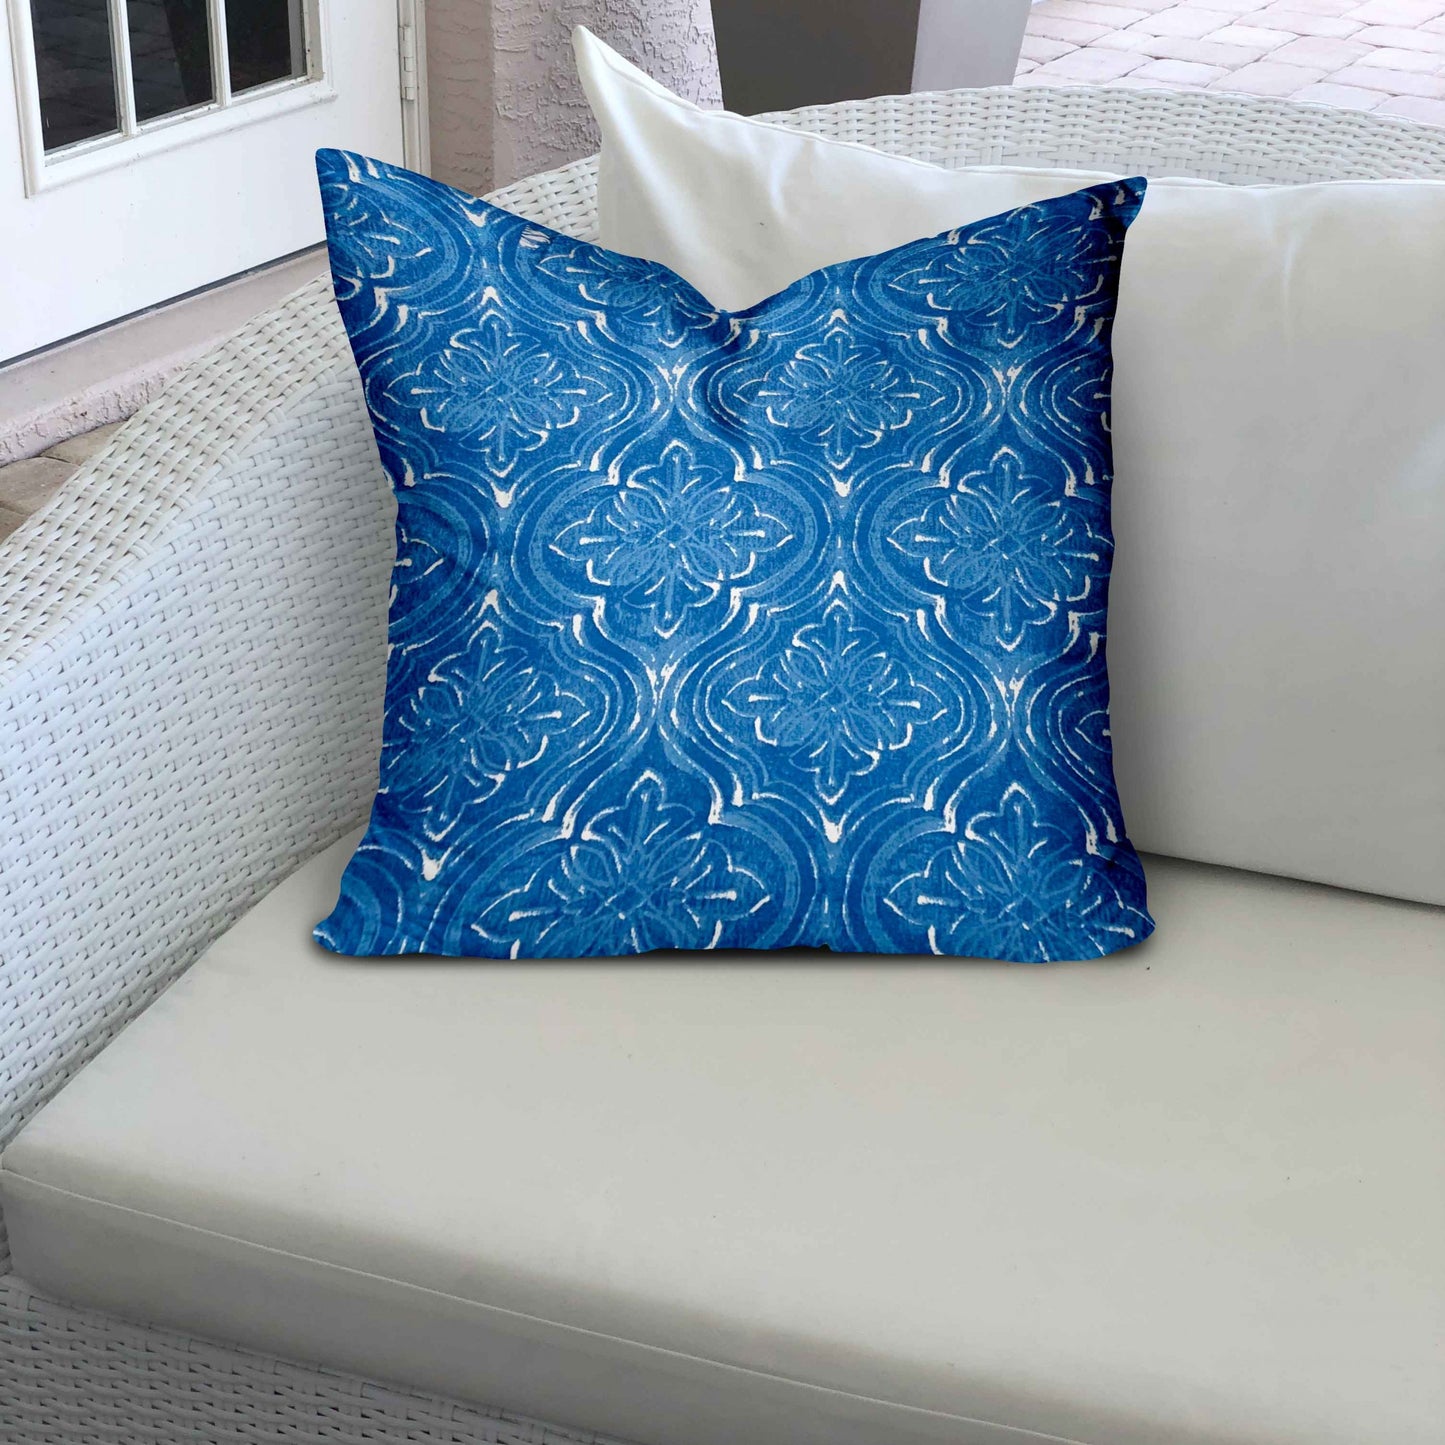 36" X 36" Blue And White Enveloped Ikat Throw Indoor Outdoor Pillow